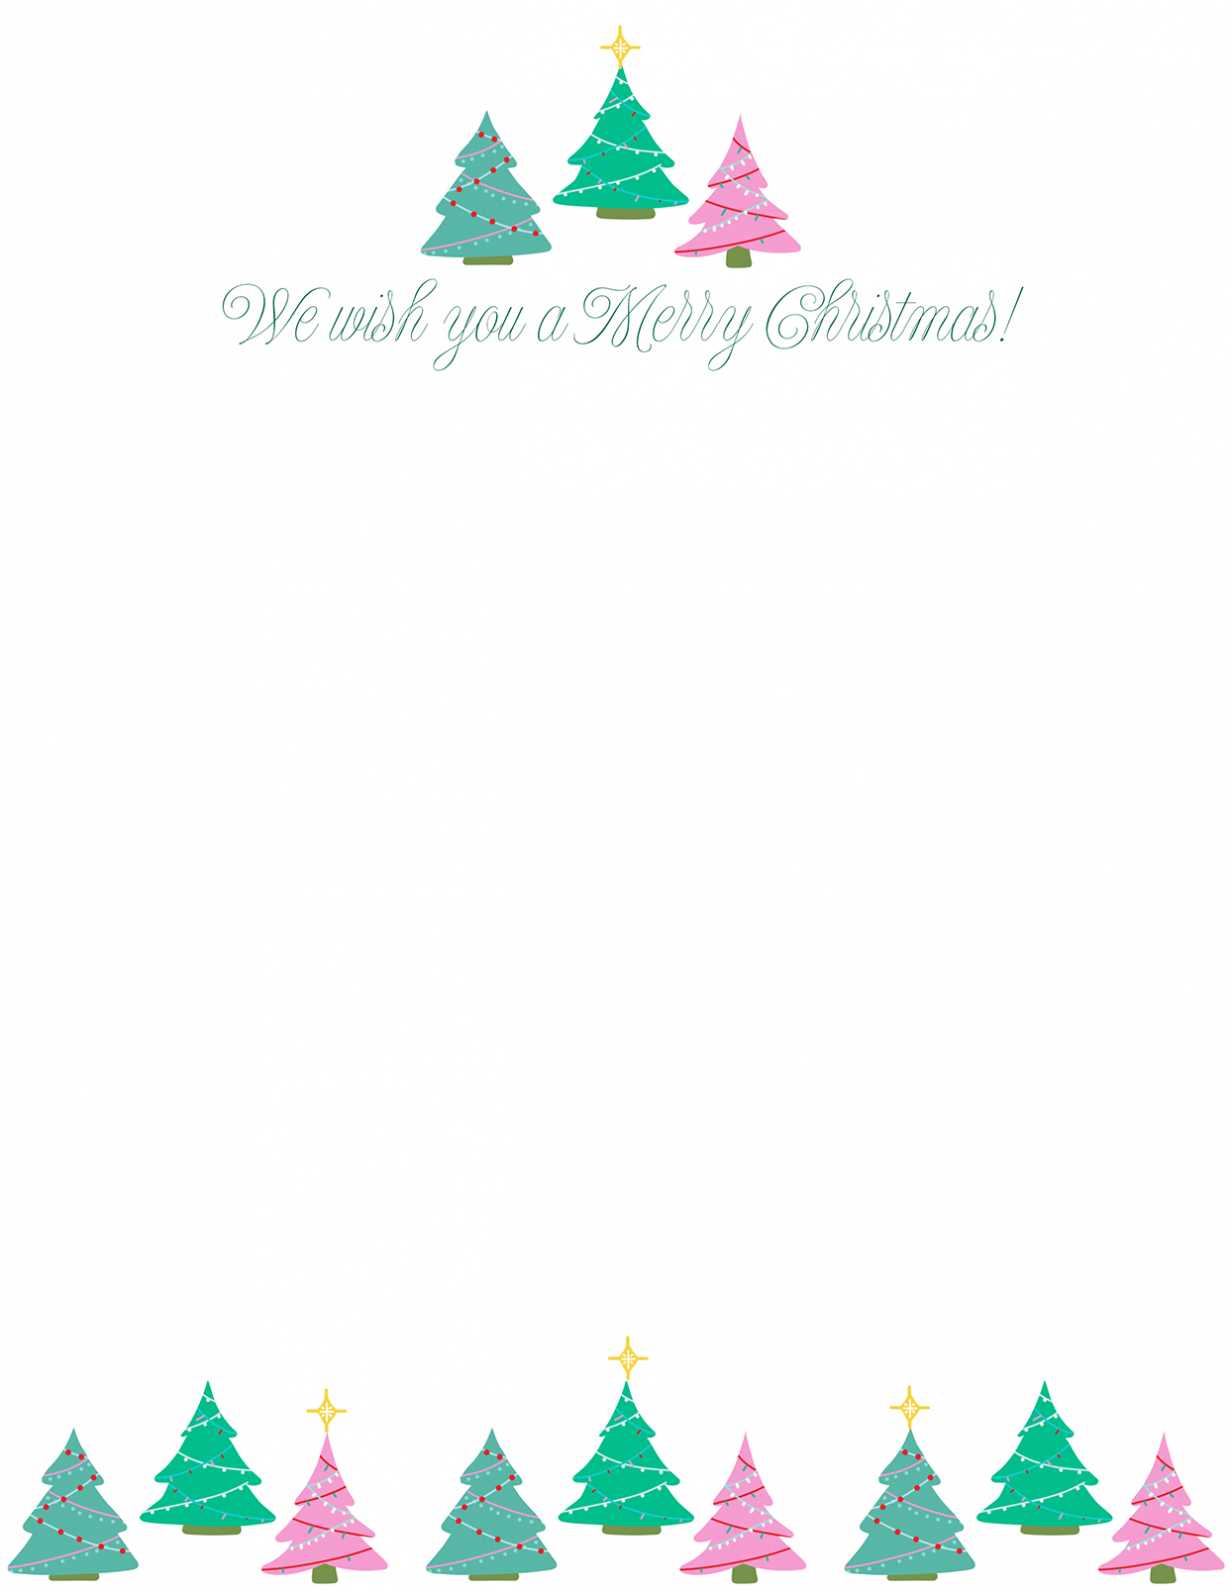 33 Free Christmas Letter Templates | Better Homes &amp; Gardens with regard to Free Christmas Letterhead Templates